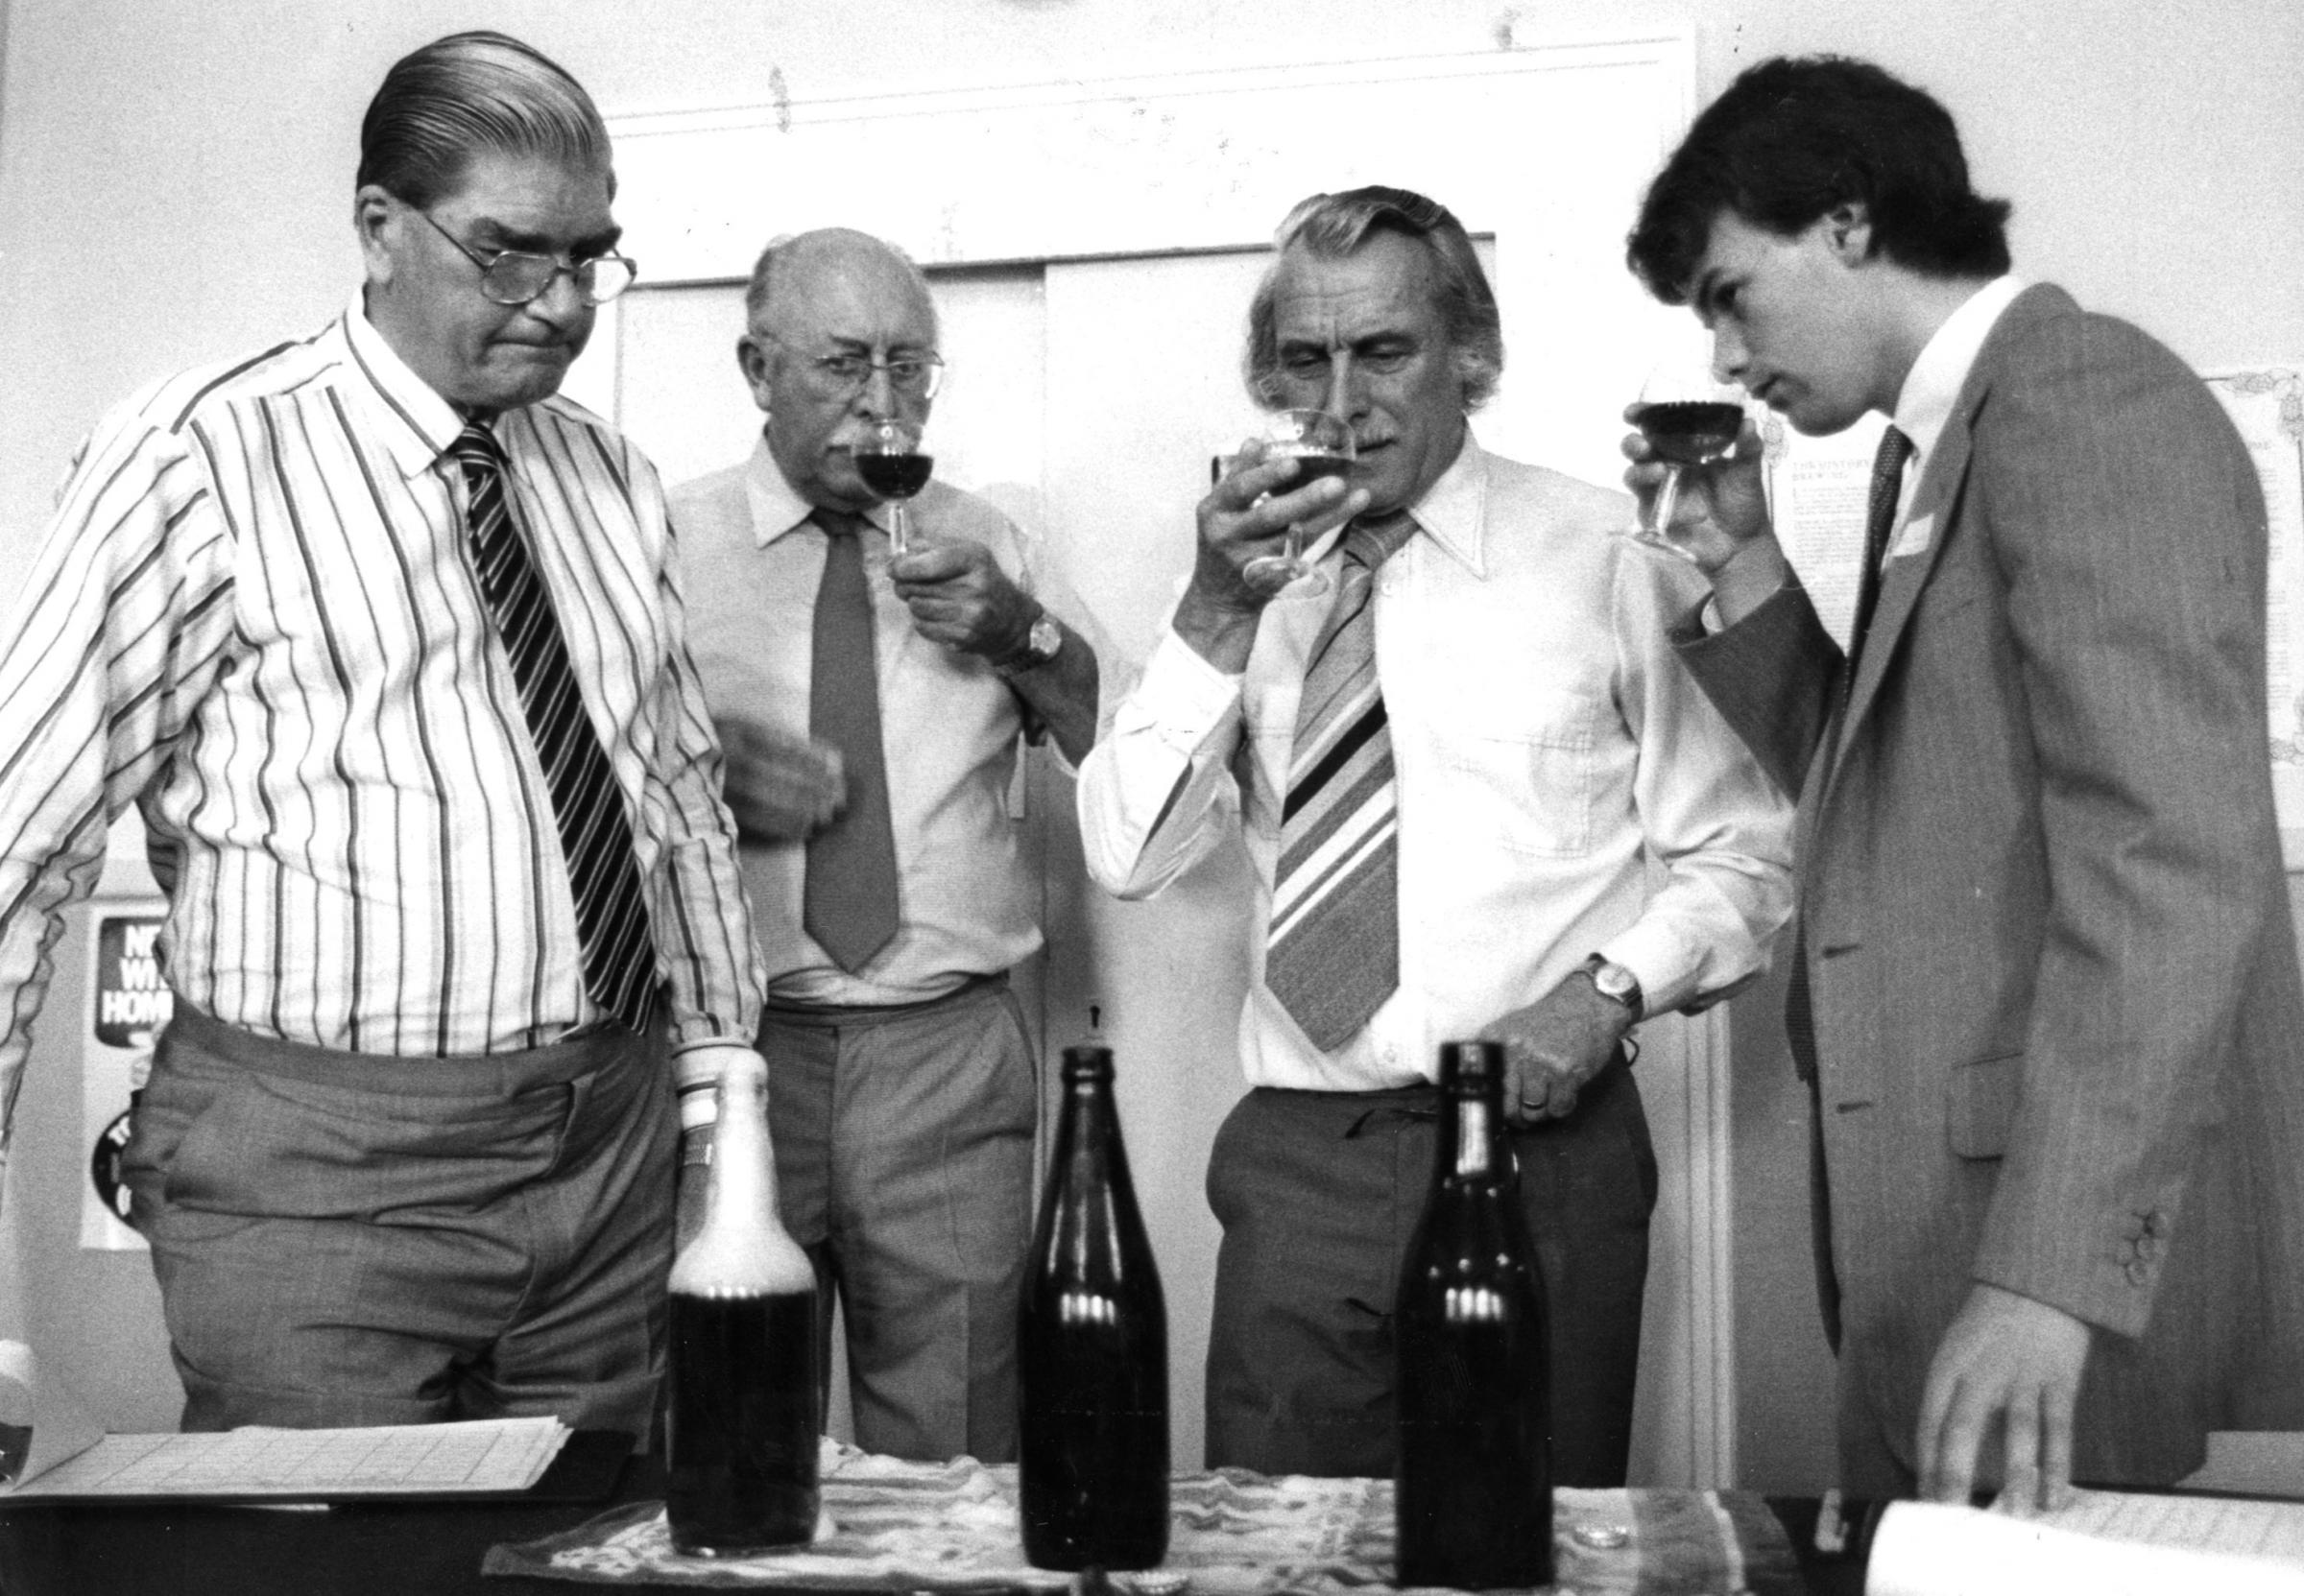 Judging beer - there are worse jobs. August 6, 1982..